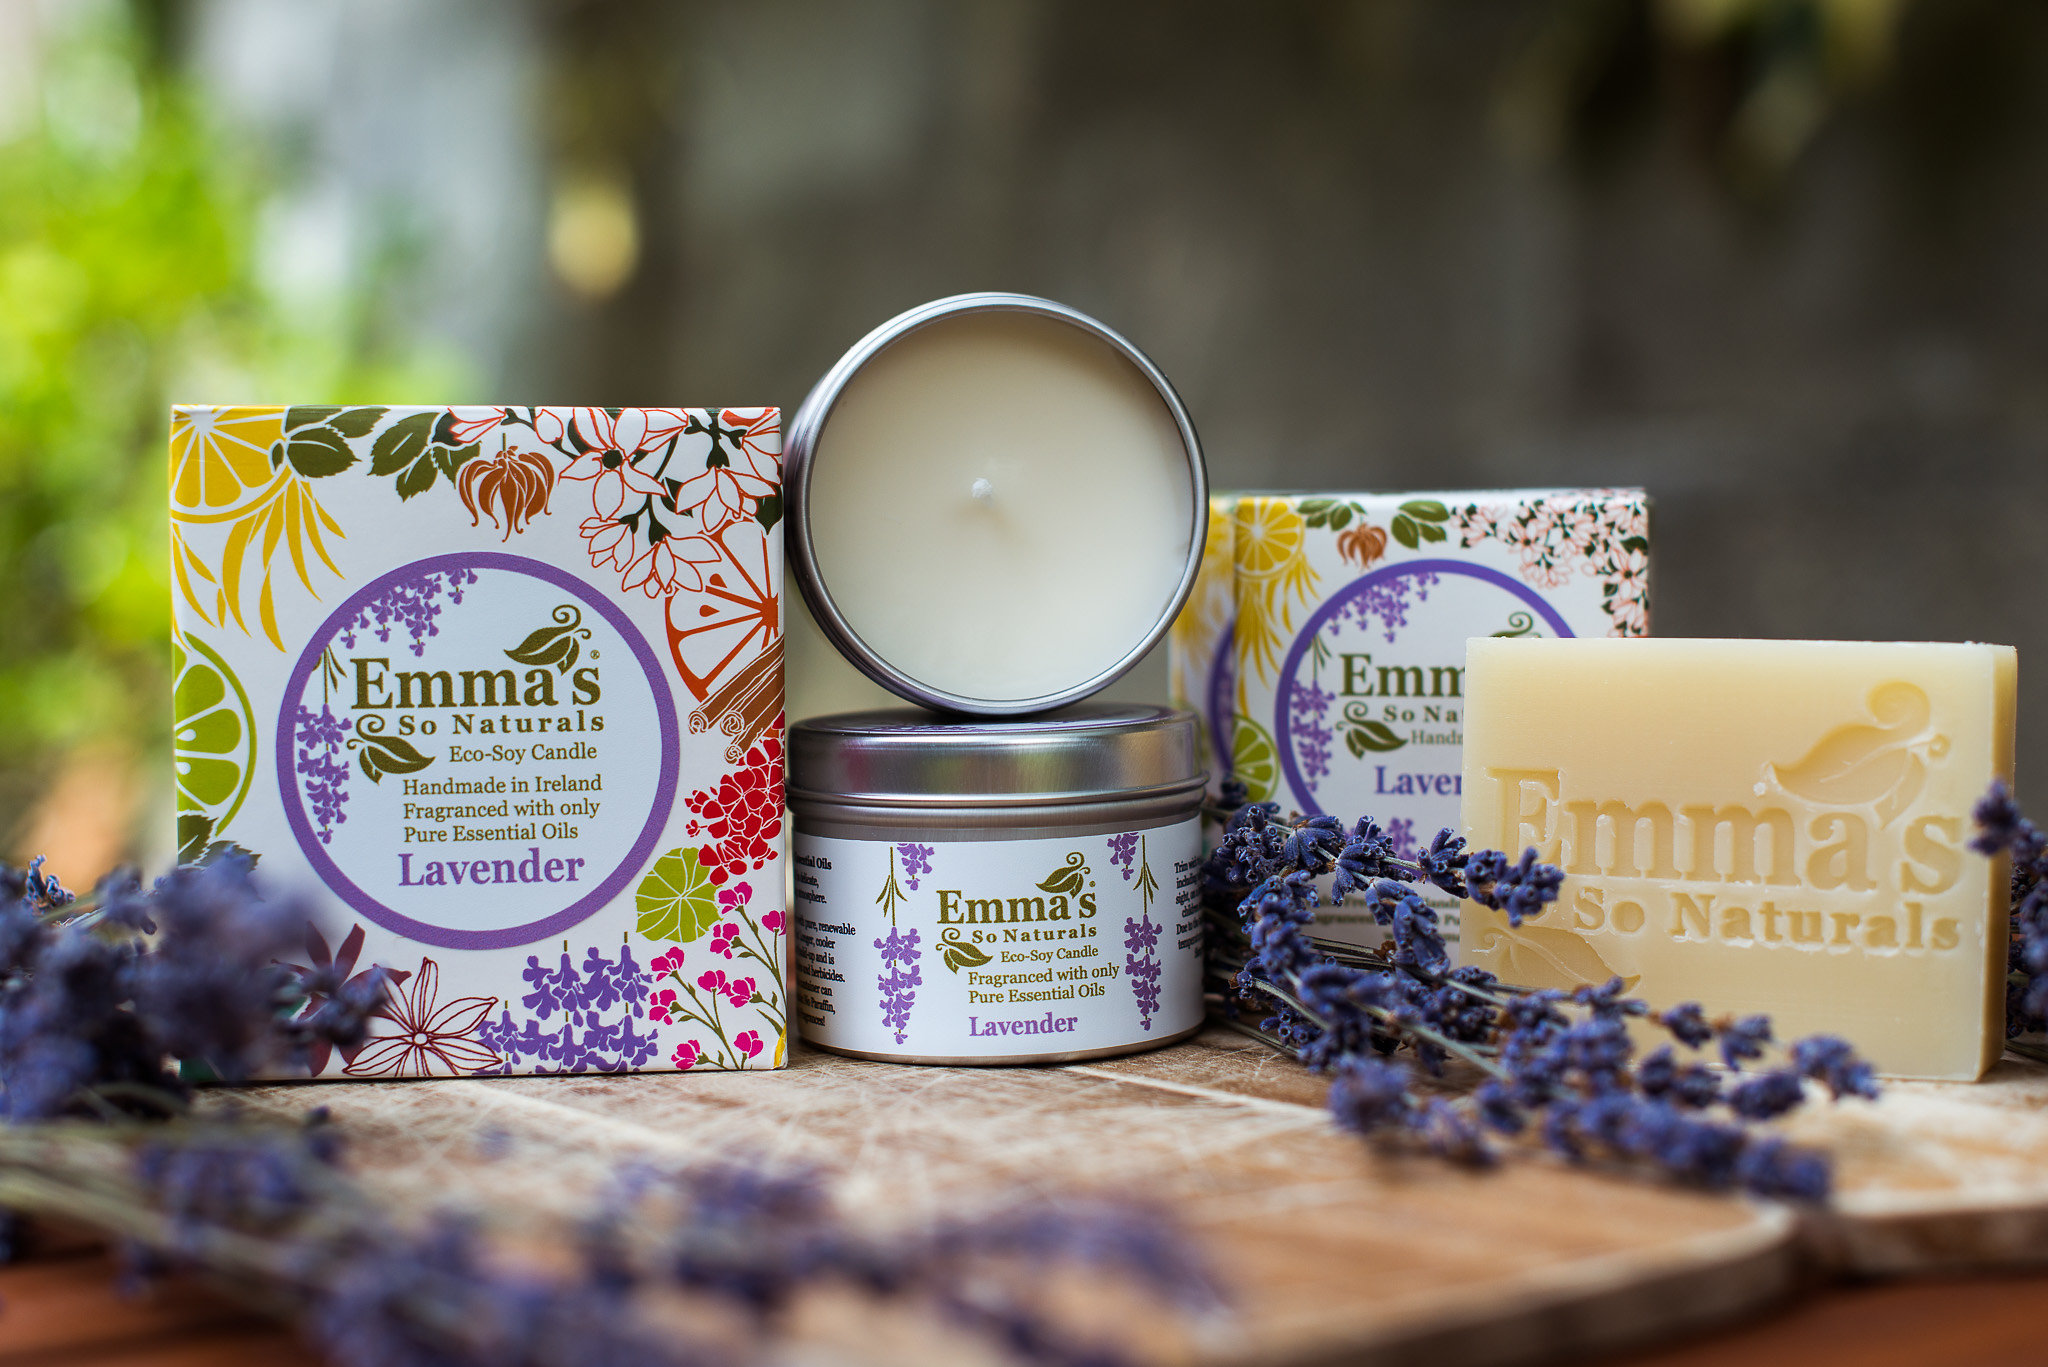 Emma's So Naturals Lavender Soy Candle & Soap Collection